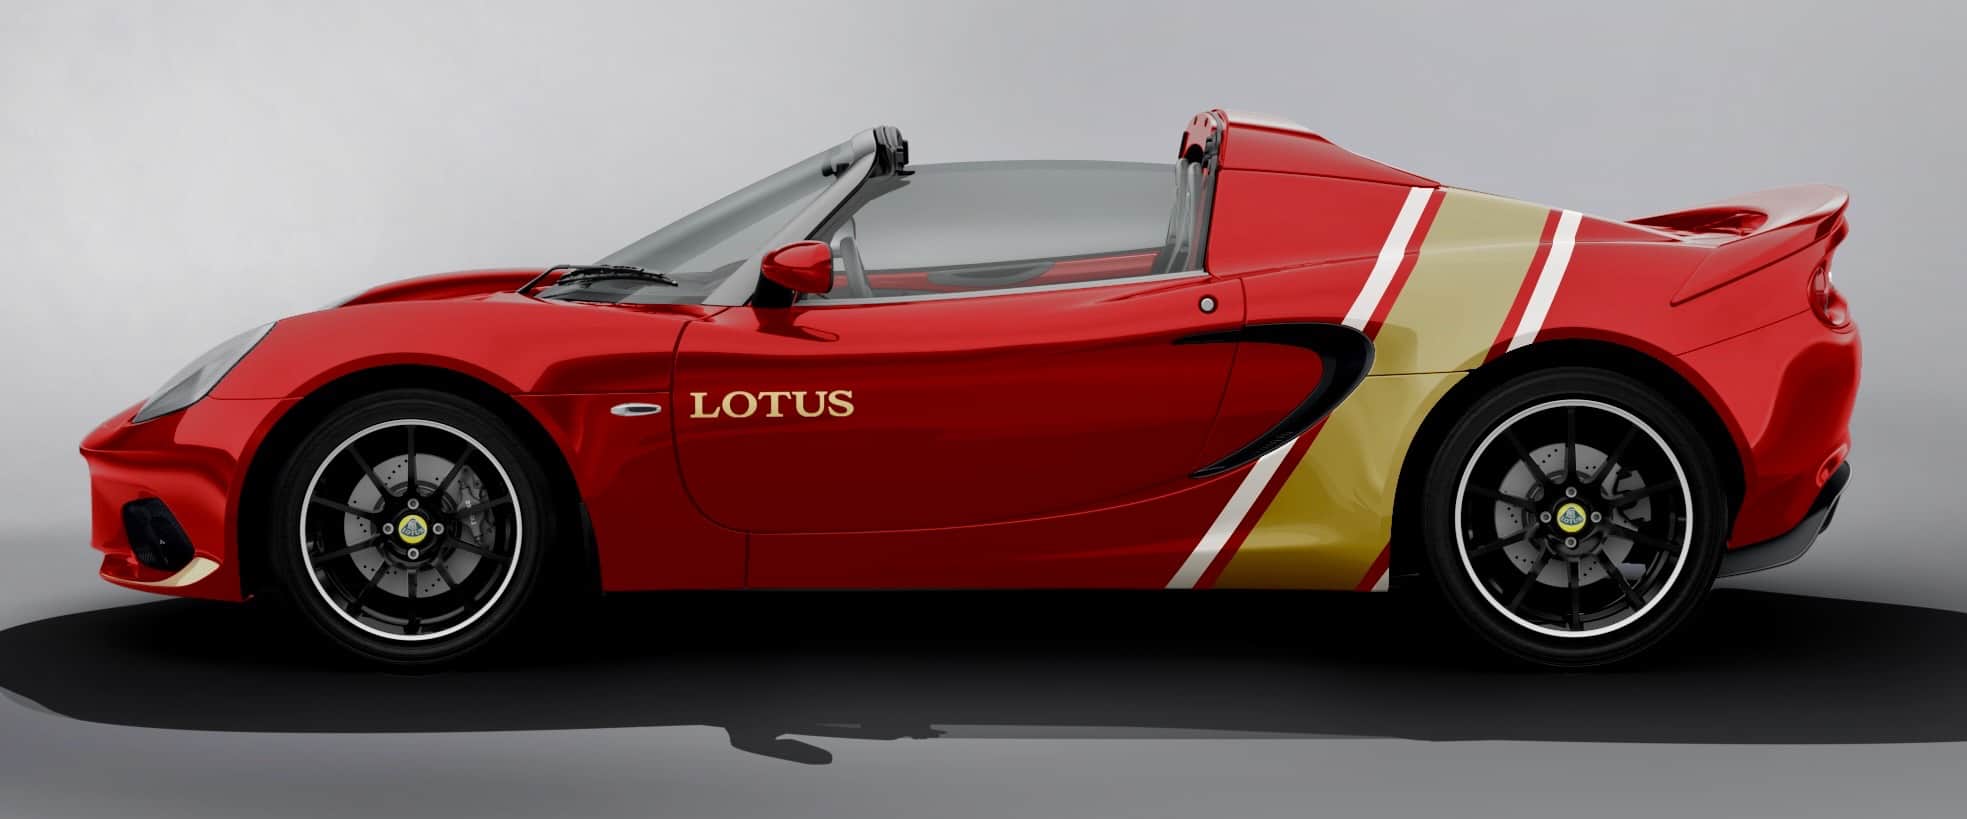 Lotus, Lotus offers special heritage liveries, ClassicCars.com Journal